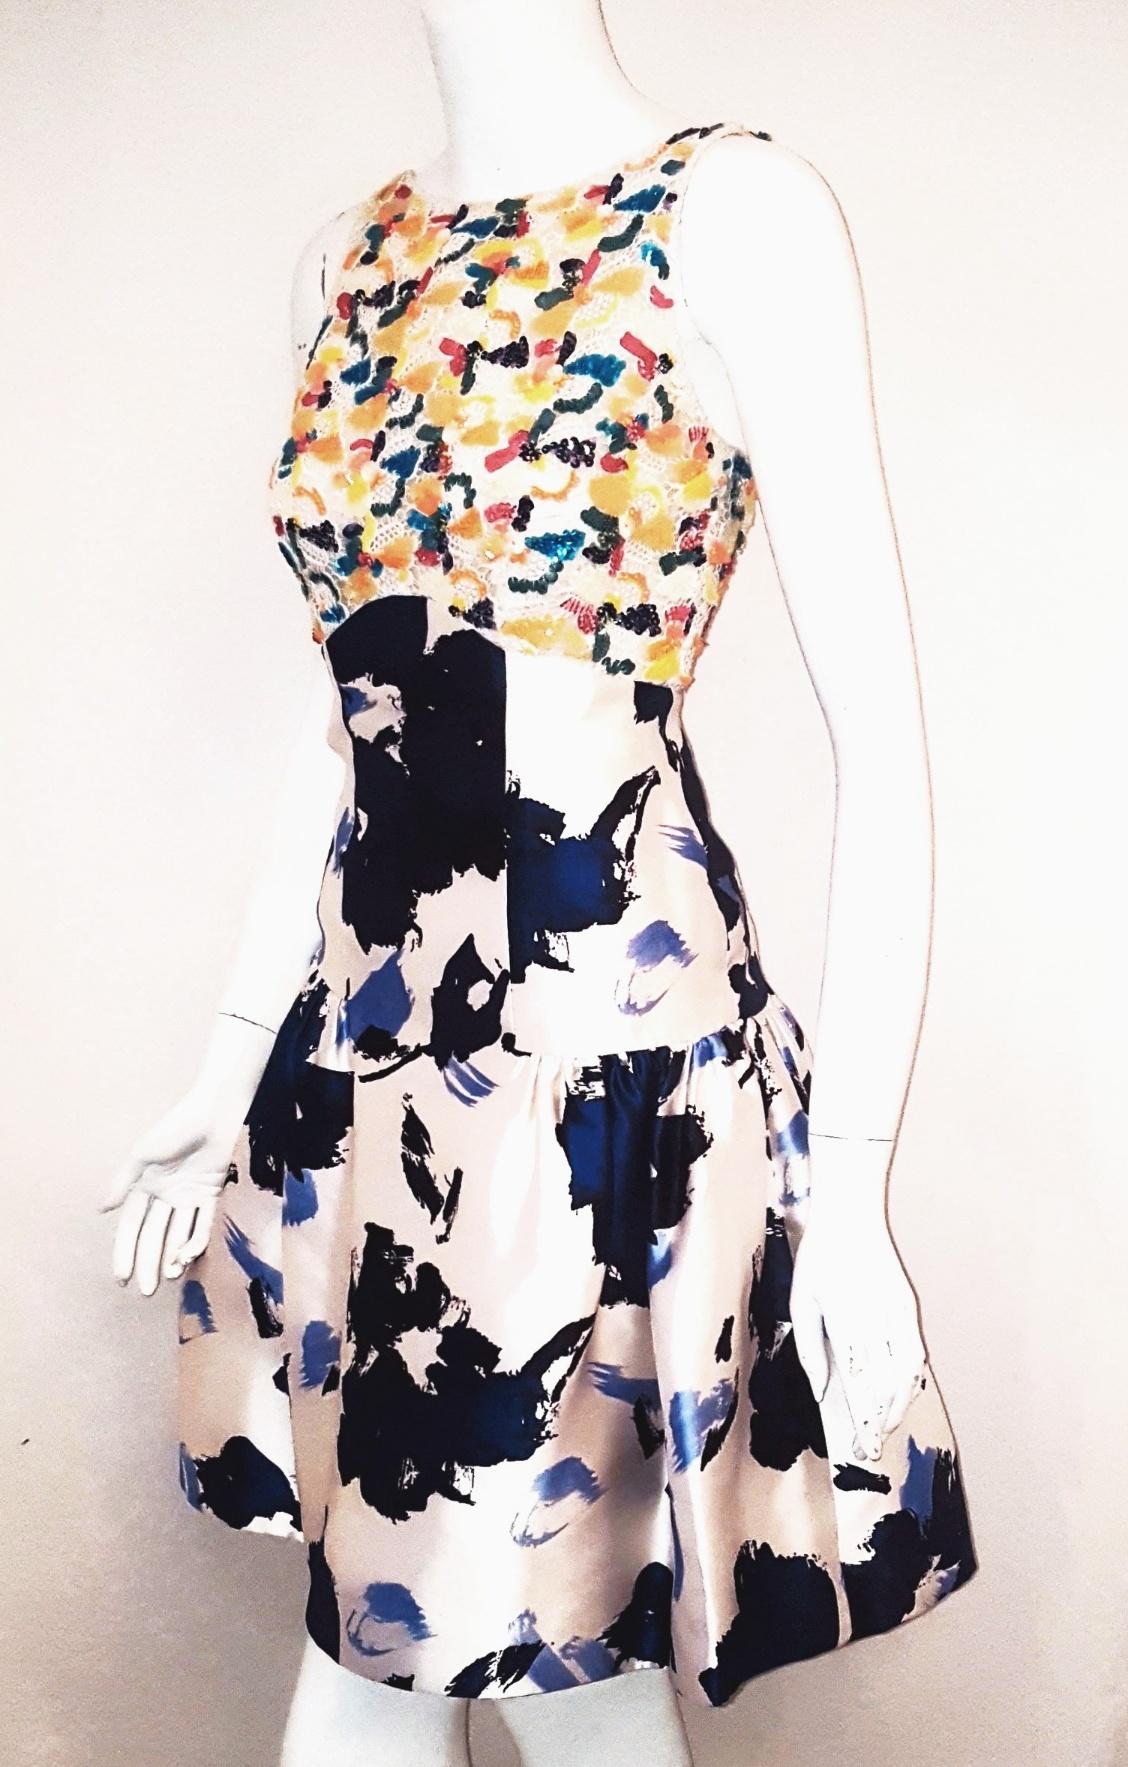 Oscar de la Renta's mix media white and royal blue silk dress is detailed with multi color sequins in a whimsical design on white cotton lace.  The dress is cut to a fit and flare silhouette with a pleated skirt.  This sleeveless dress with thin